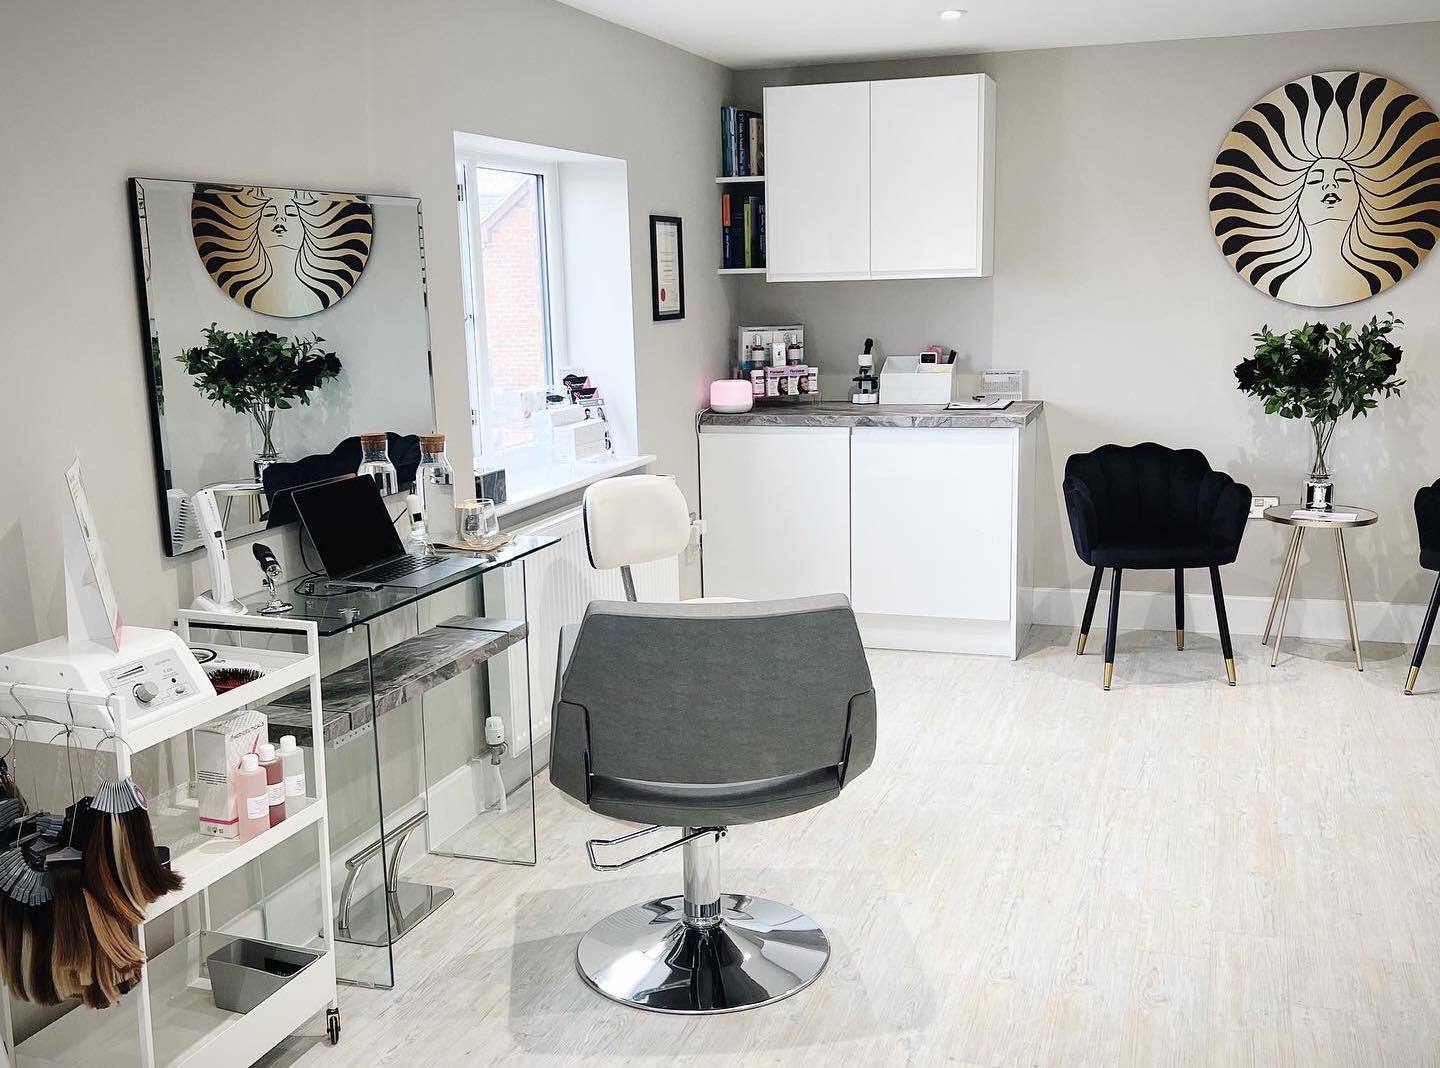 The salon - Hair Loss - is a warm and friendly place for women to feel relaxed